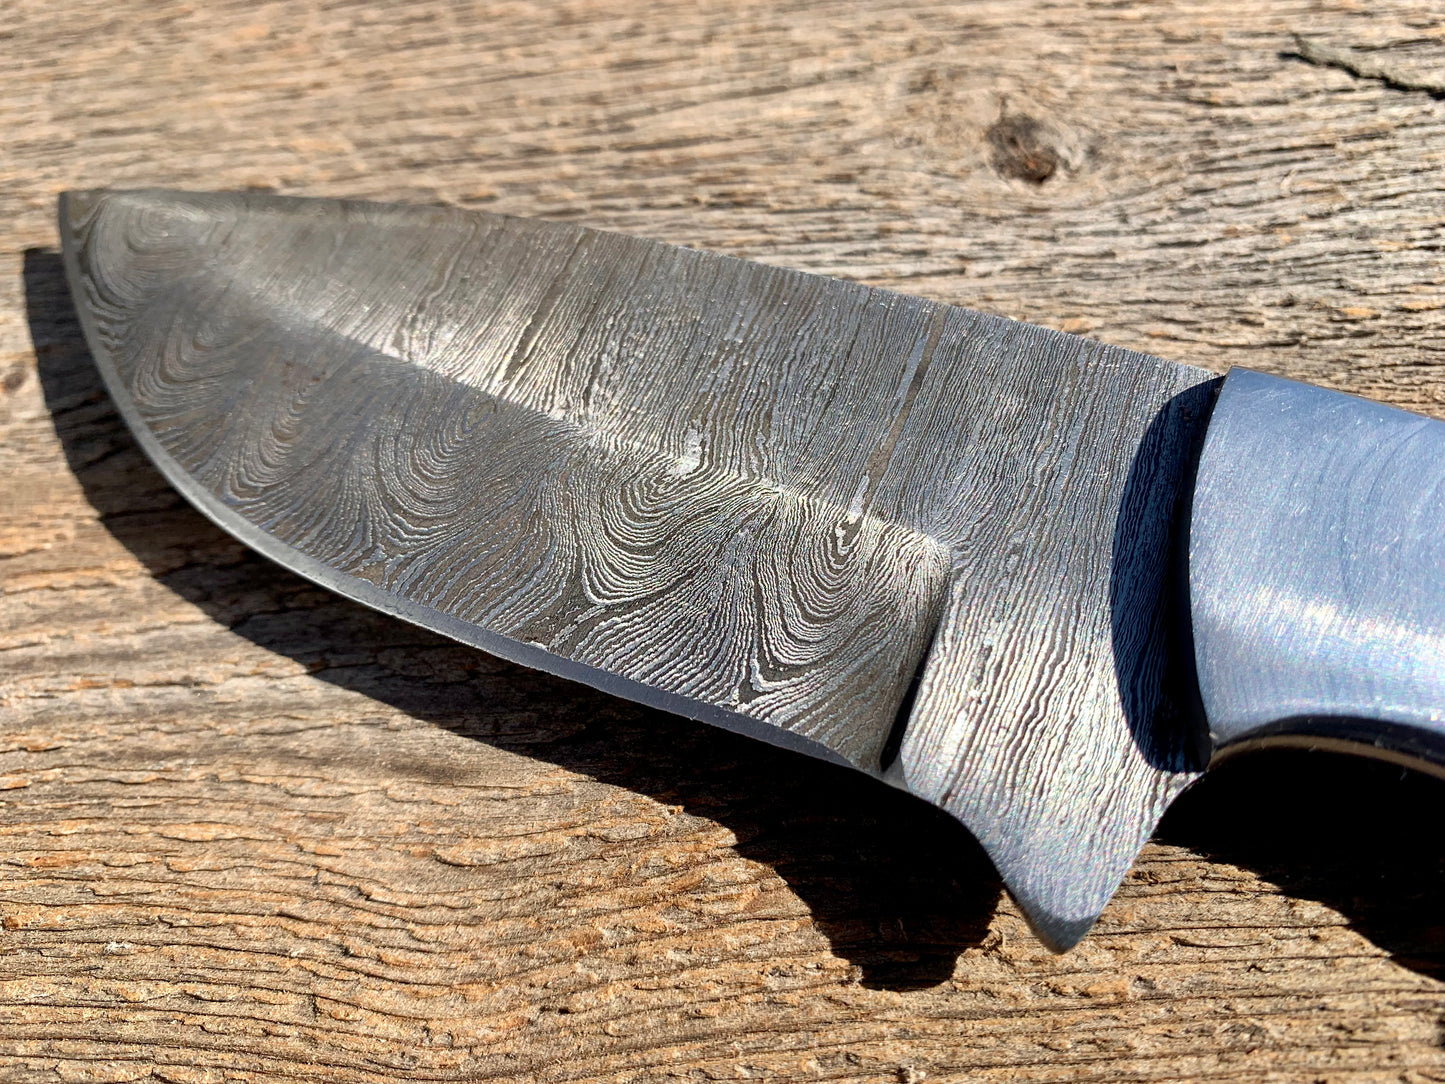 Stainless Handle Damascus Steel Hunting Knife